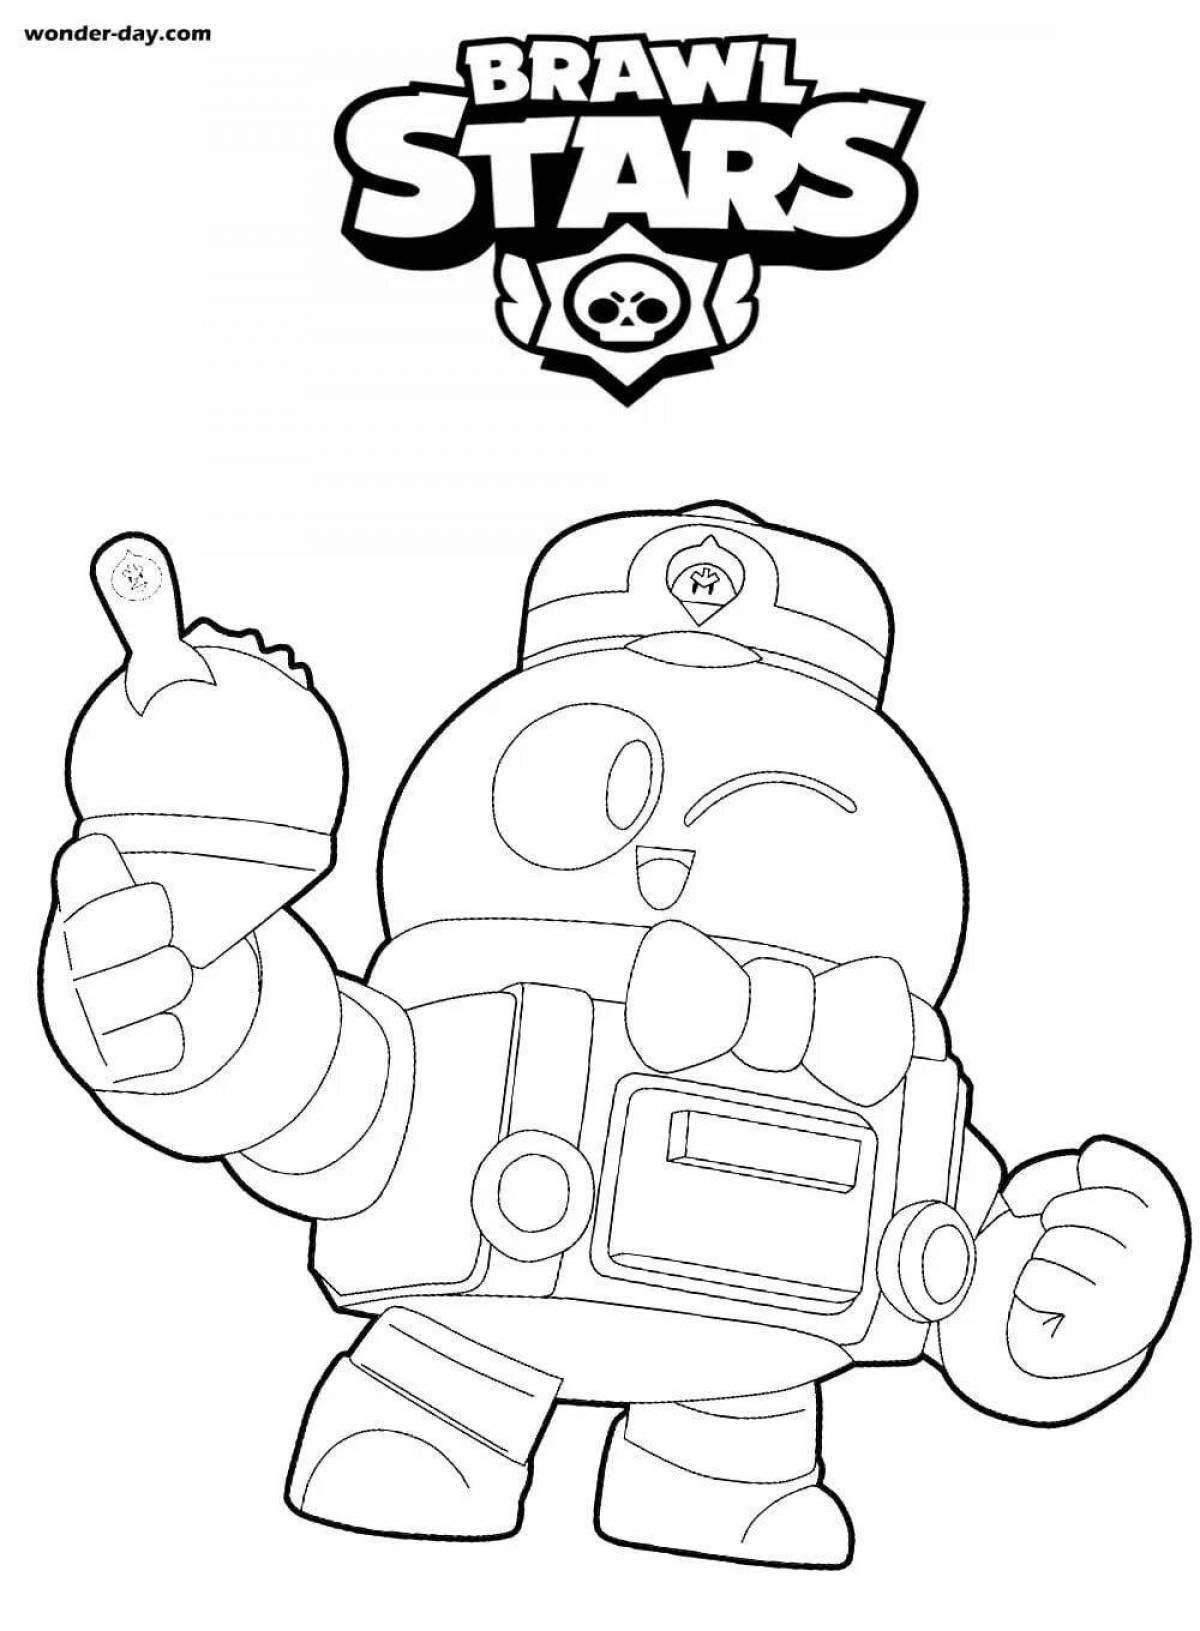 Exciting coloring pages brawl stars all brawlers